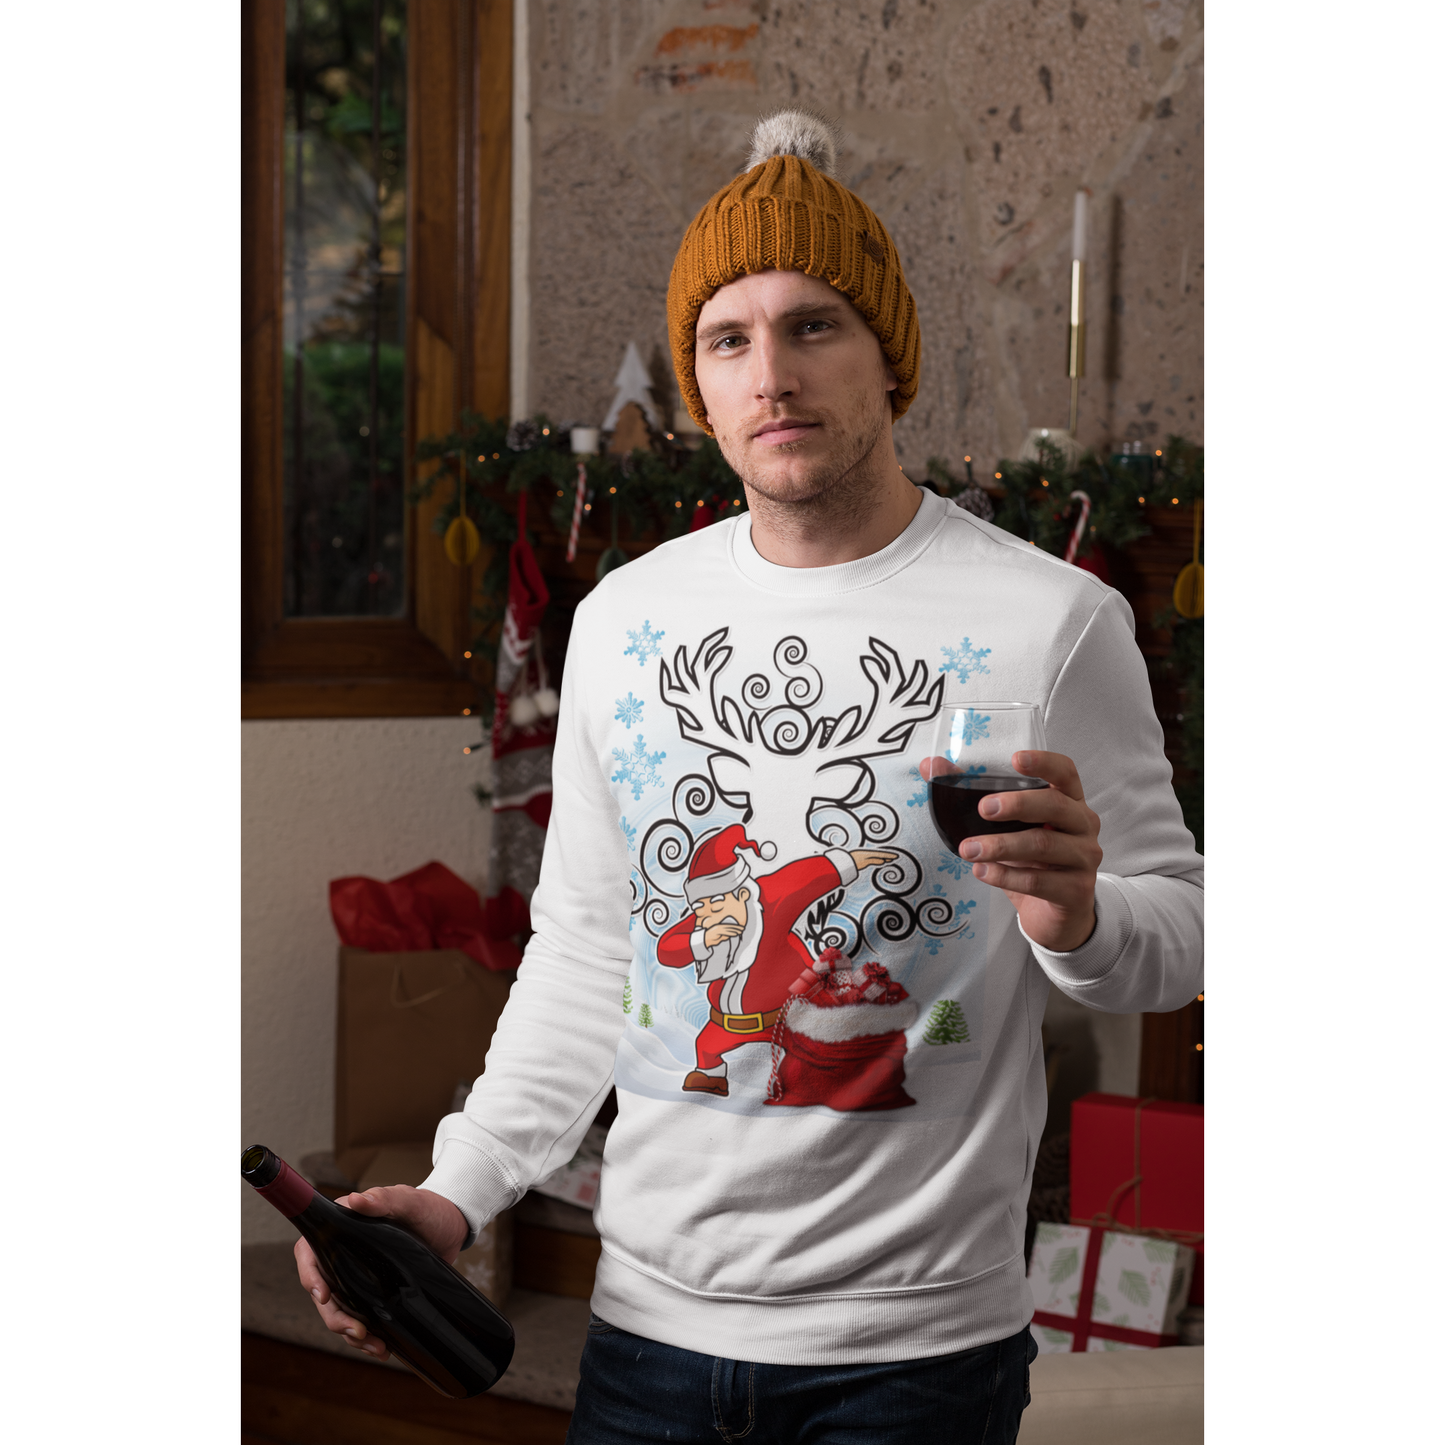 Santa Clause Dabbing Shirt (Ugly Christmas Sweater) Adult and Child - Wilson Design Group